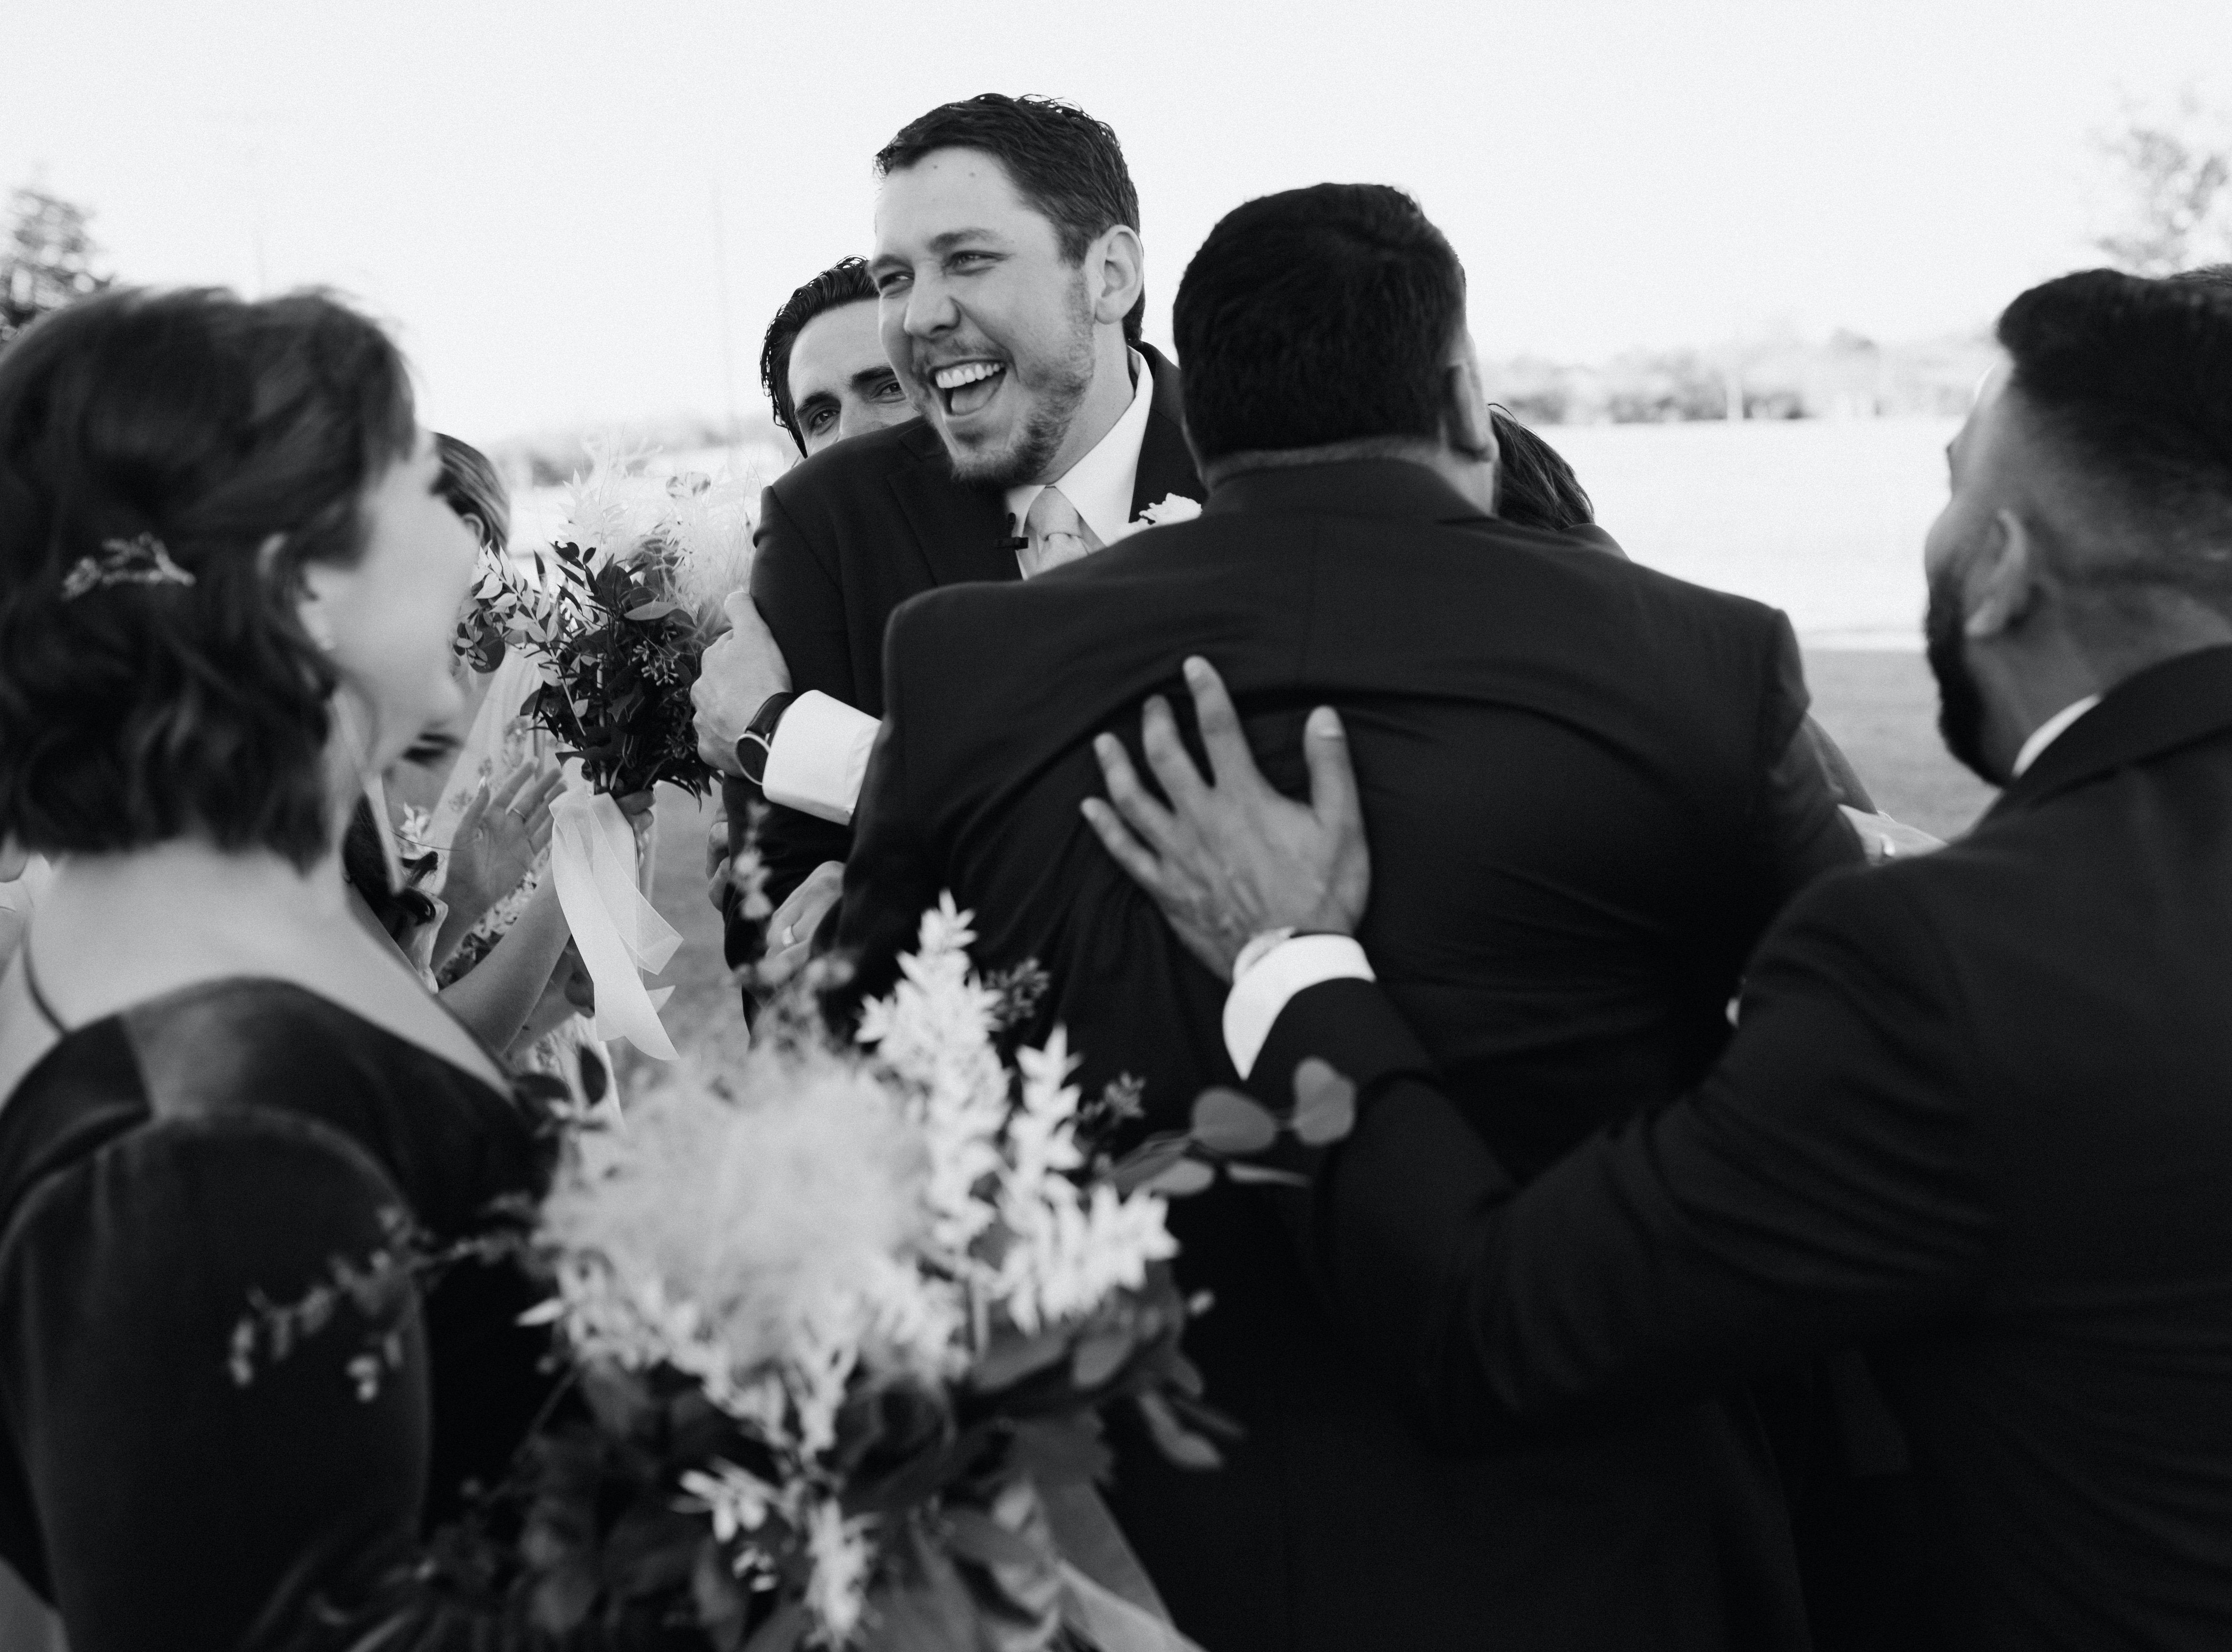 A black and white photo of a groom cheering with his groomsmen after he just got married in Brenham, TX.